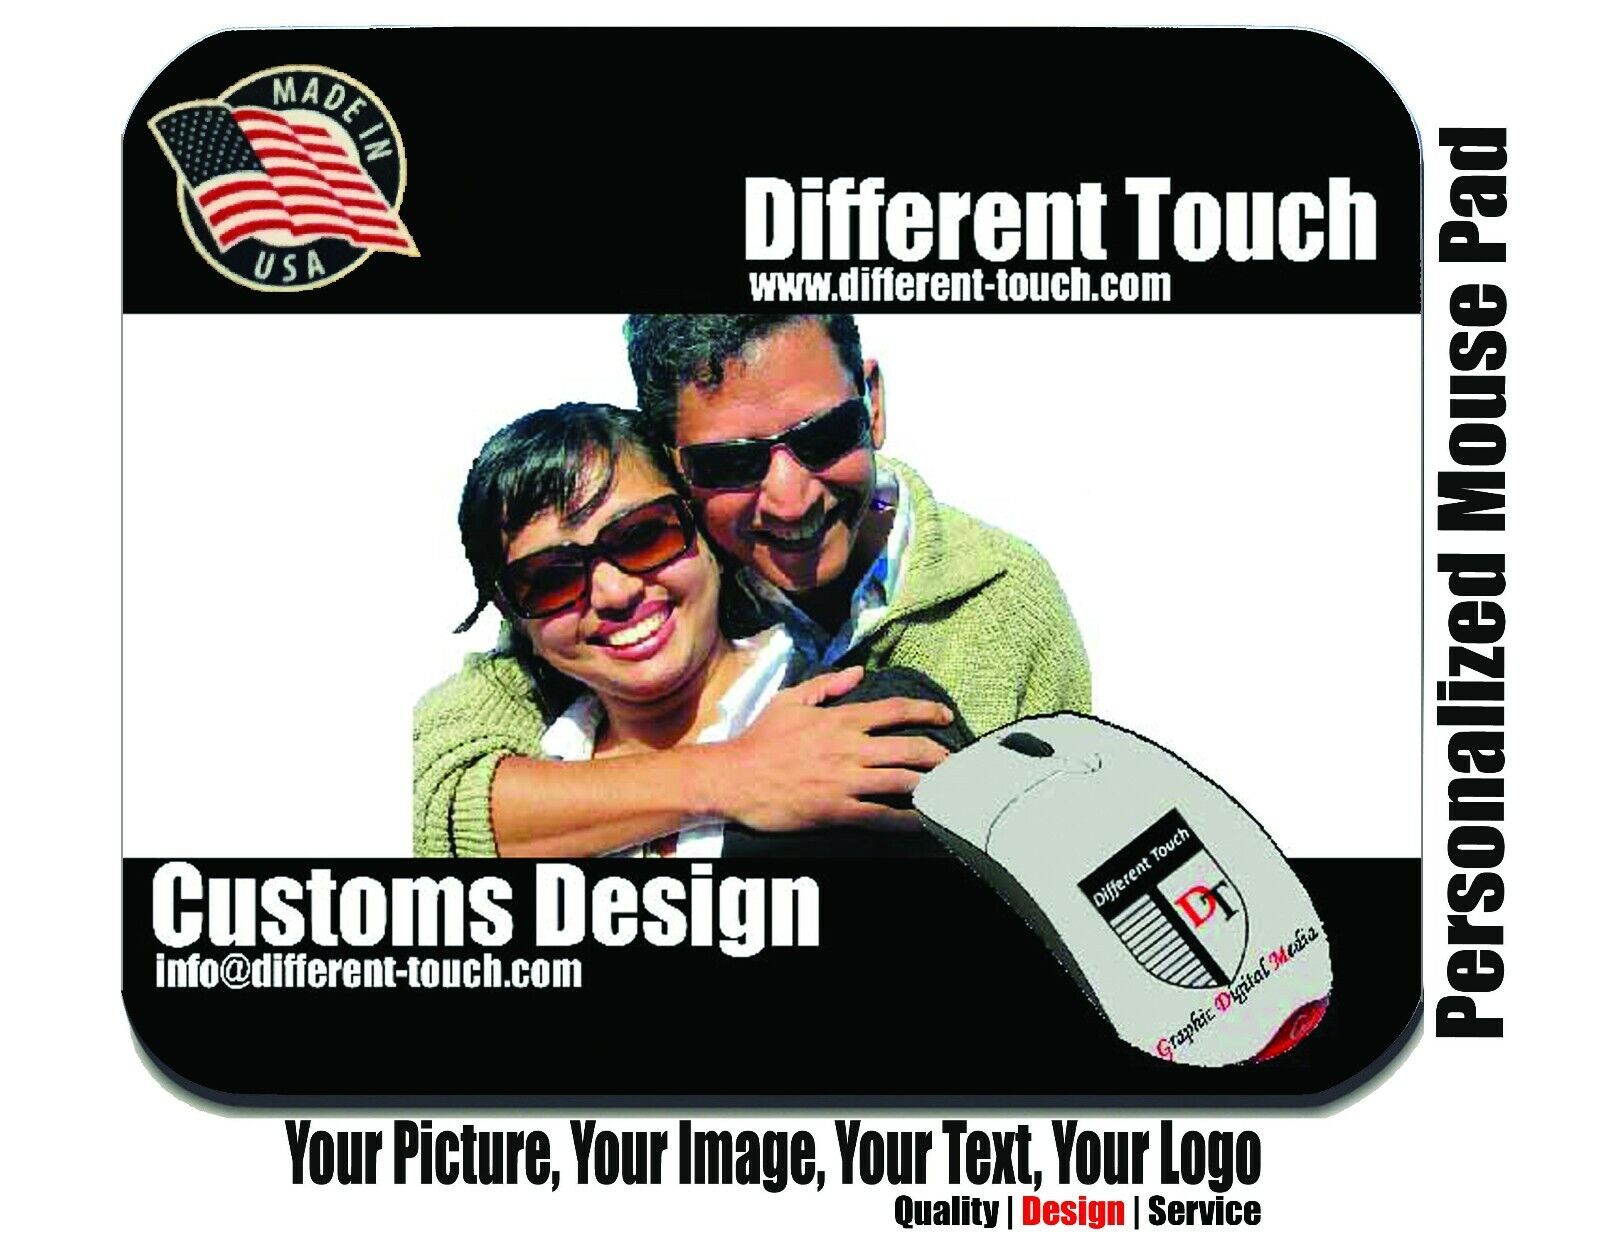 Custom printed mouse pad Photo  logo design Image or text  personalized mousepad